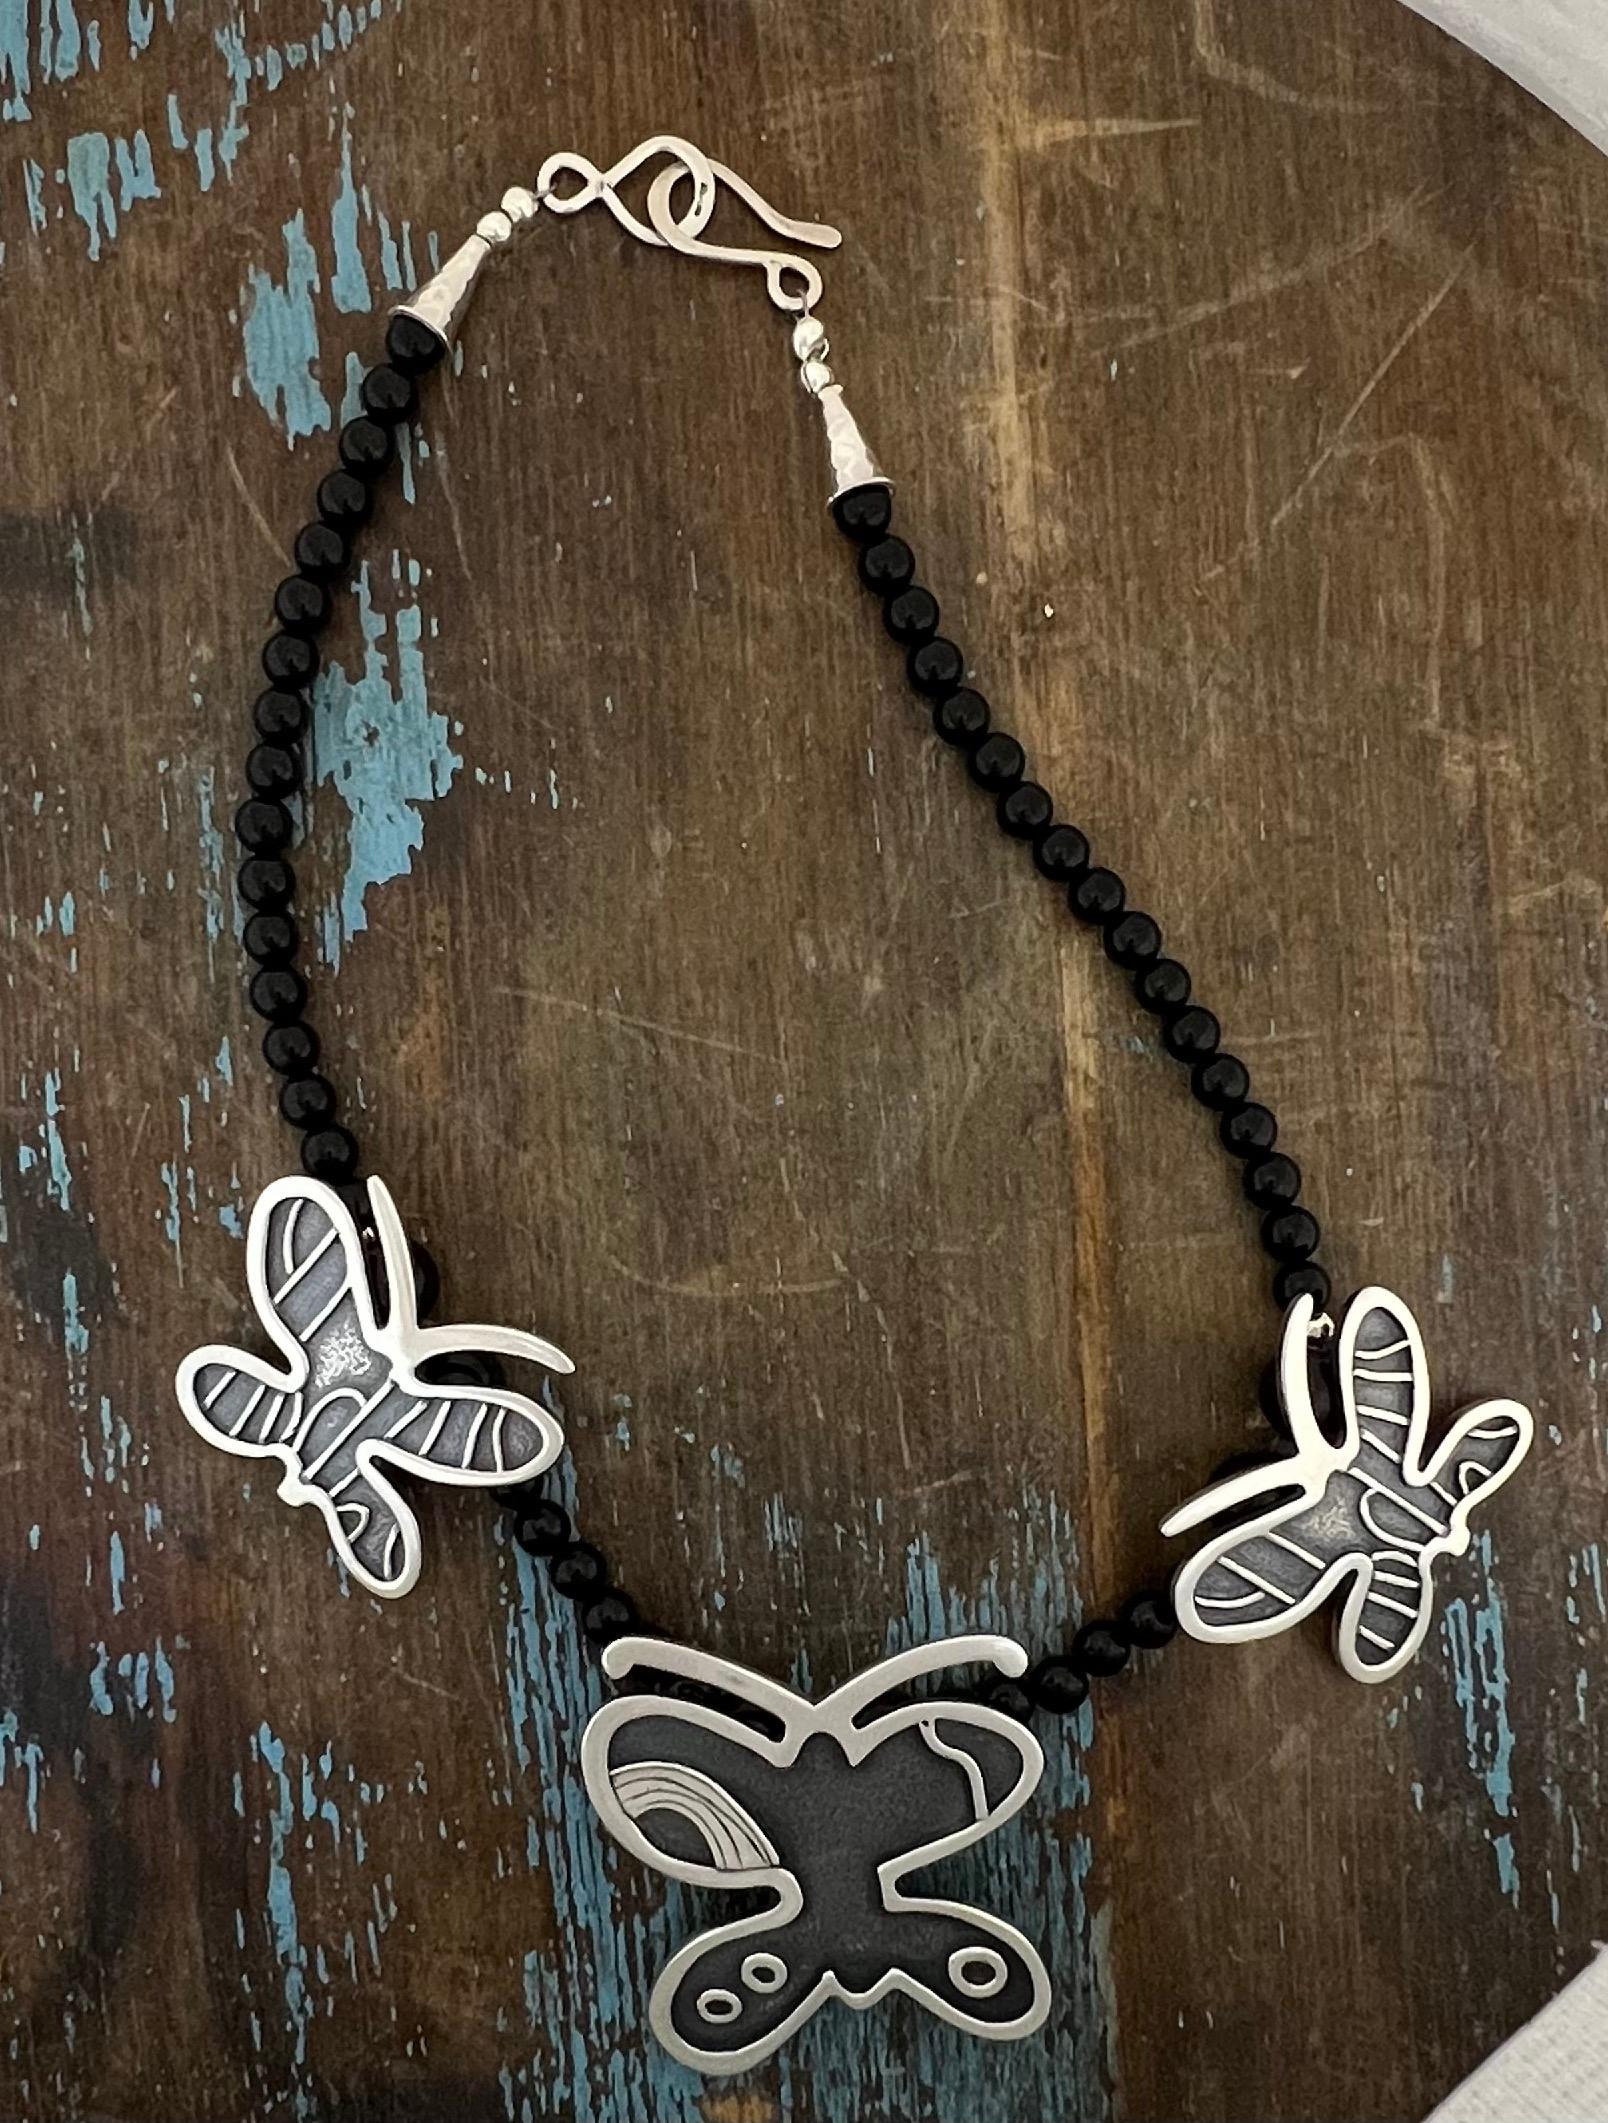 Butterflies necklace designed by Melanie A. Yazzie, Navajo, silver, onxy beads

Melanie A. Yazzie (Navajo-Diné) is a highly regarded multimedia artist known for her printmaking, paintings, sculpture, and jewelry designs. She has exhibited, lectured,